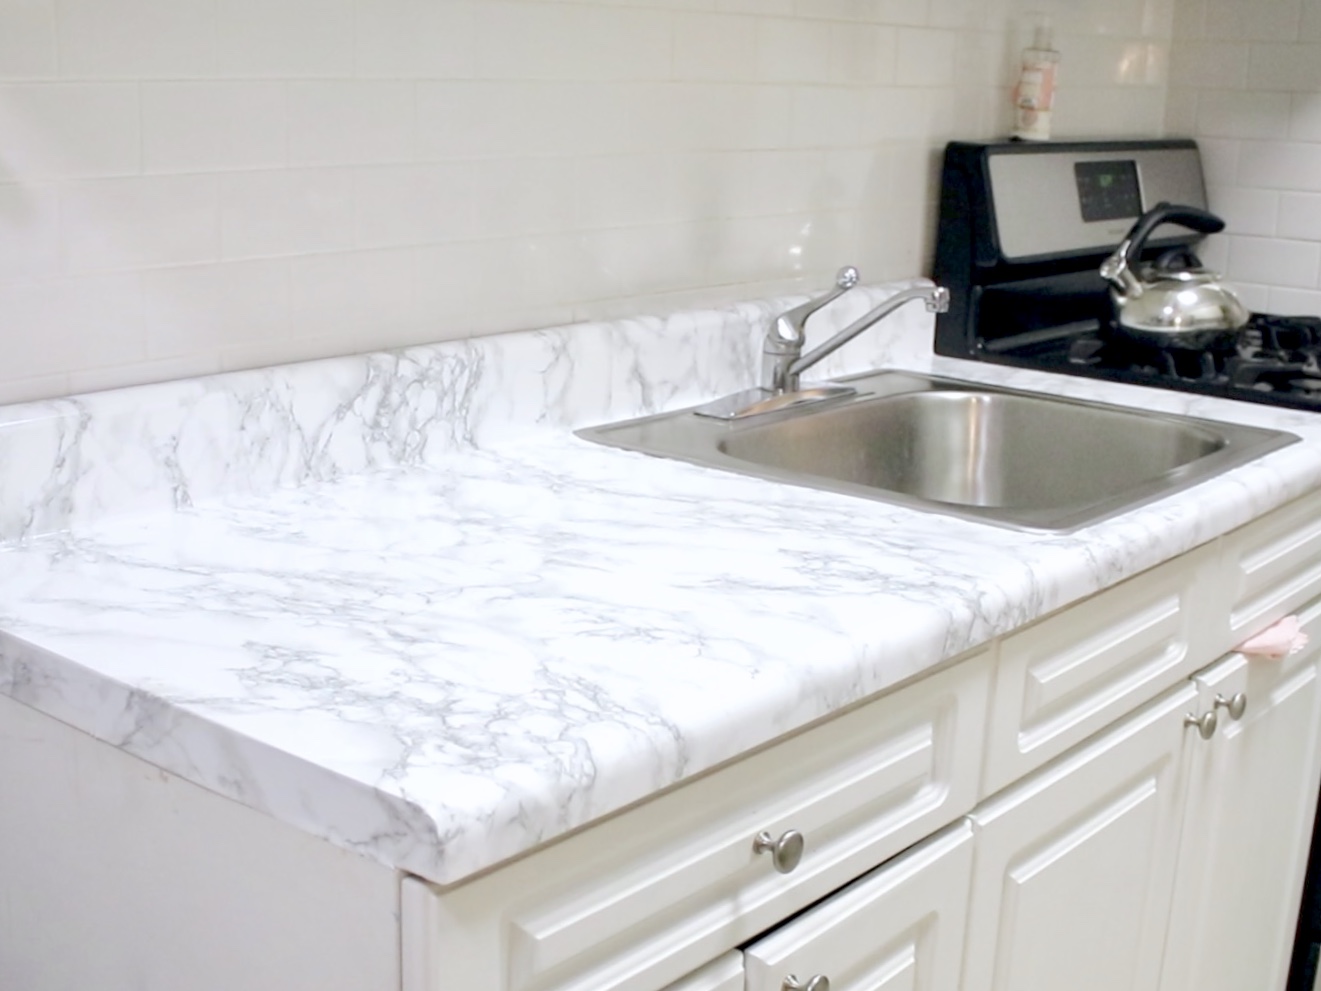 Cheap & Easy DIY Marble Kitchen Counters - Domesticated Me